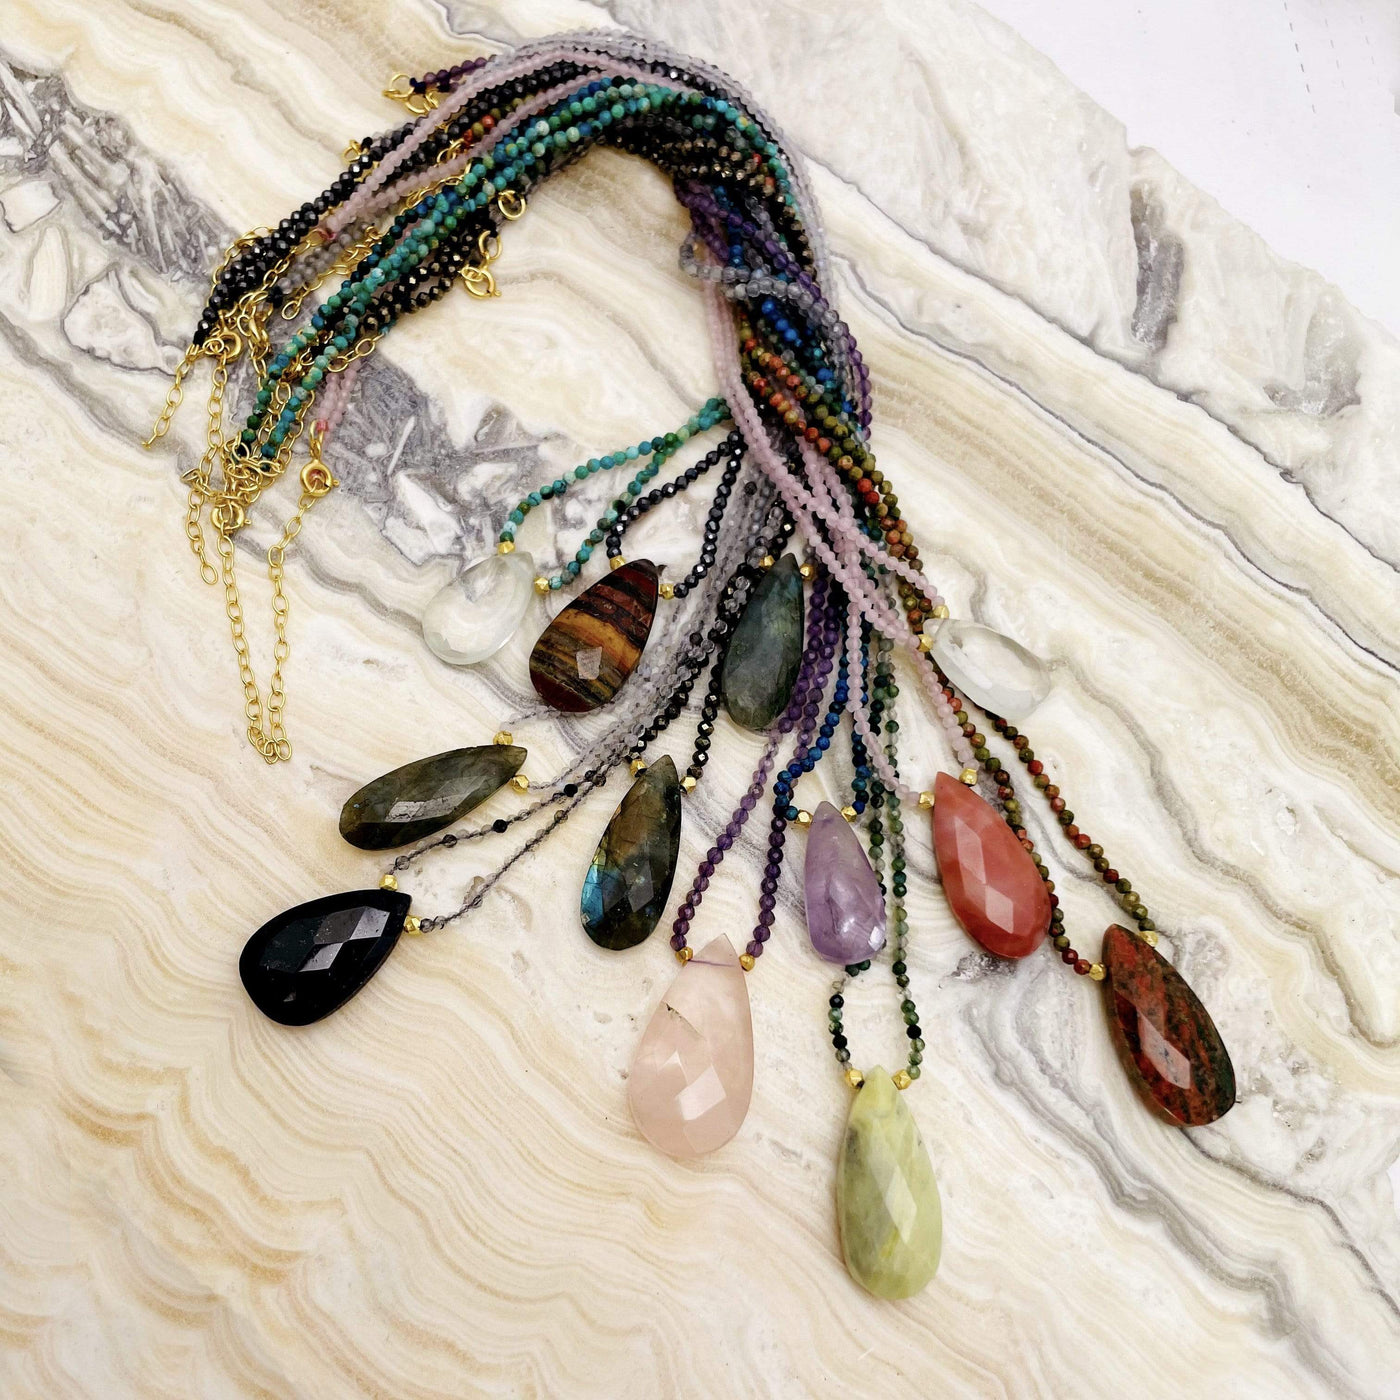 stone teardrop necklaces bundled together on a table